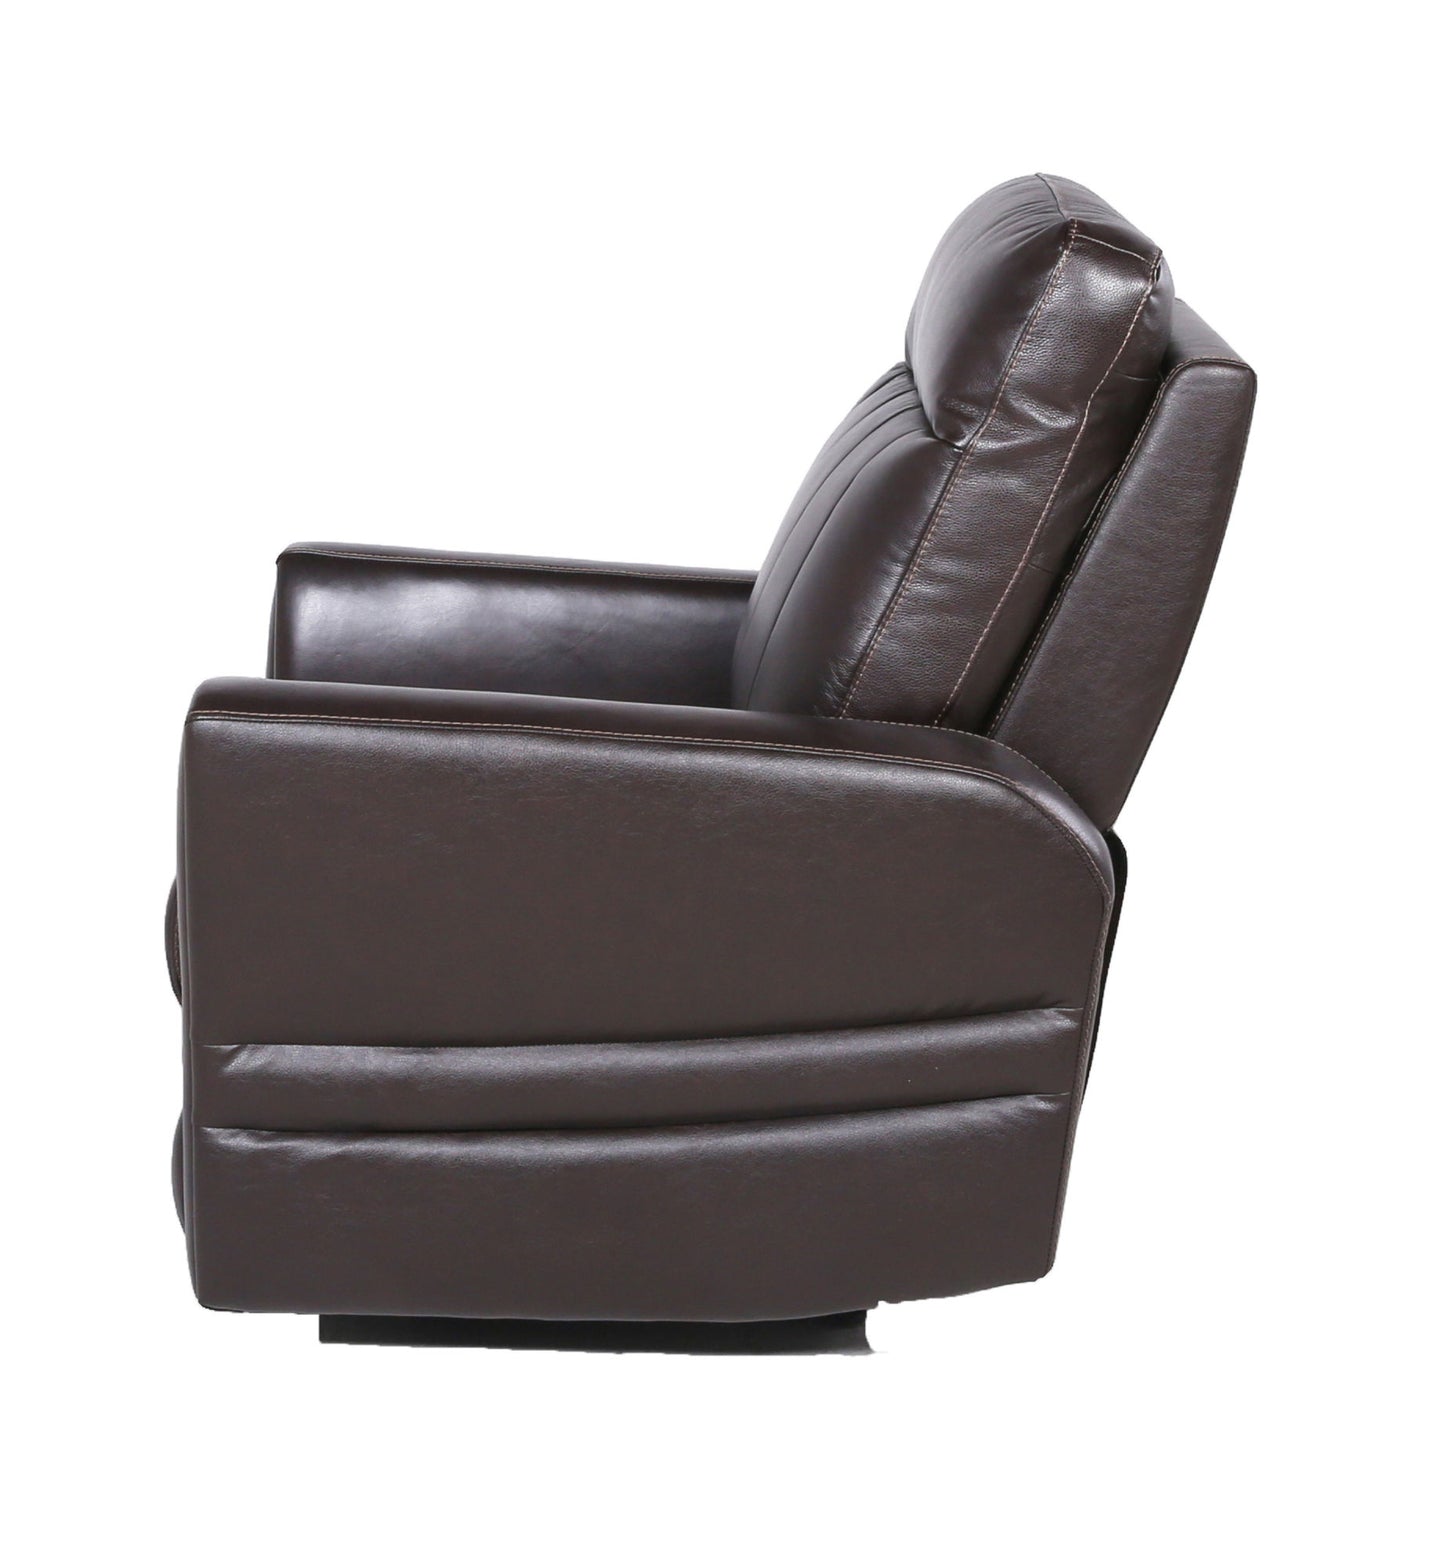 Dark Brown Top-Grain Leather Chair with Power Leg Rest and Articulating Headrest